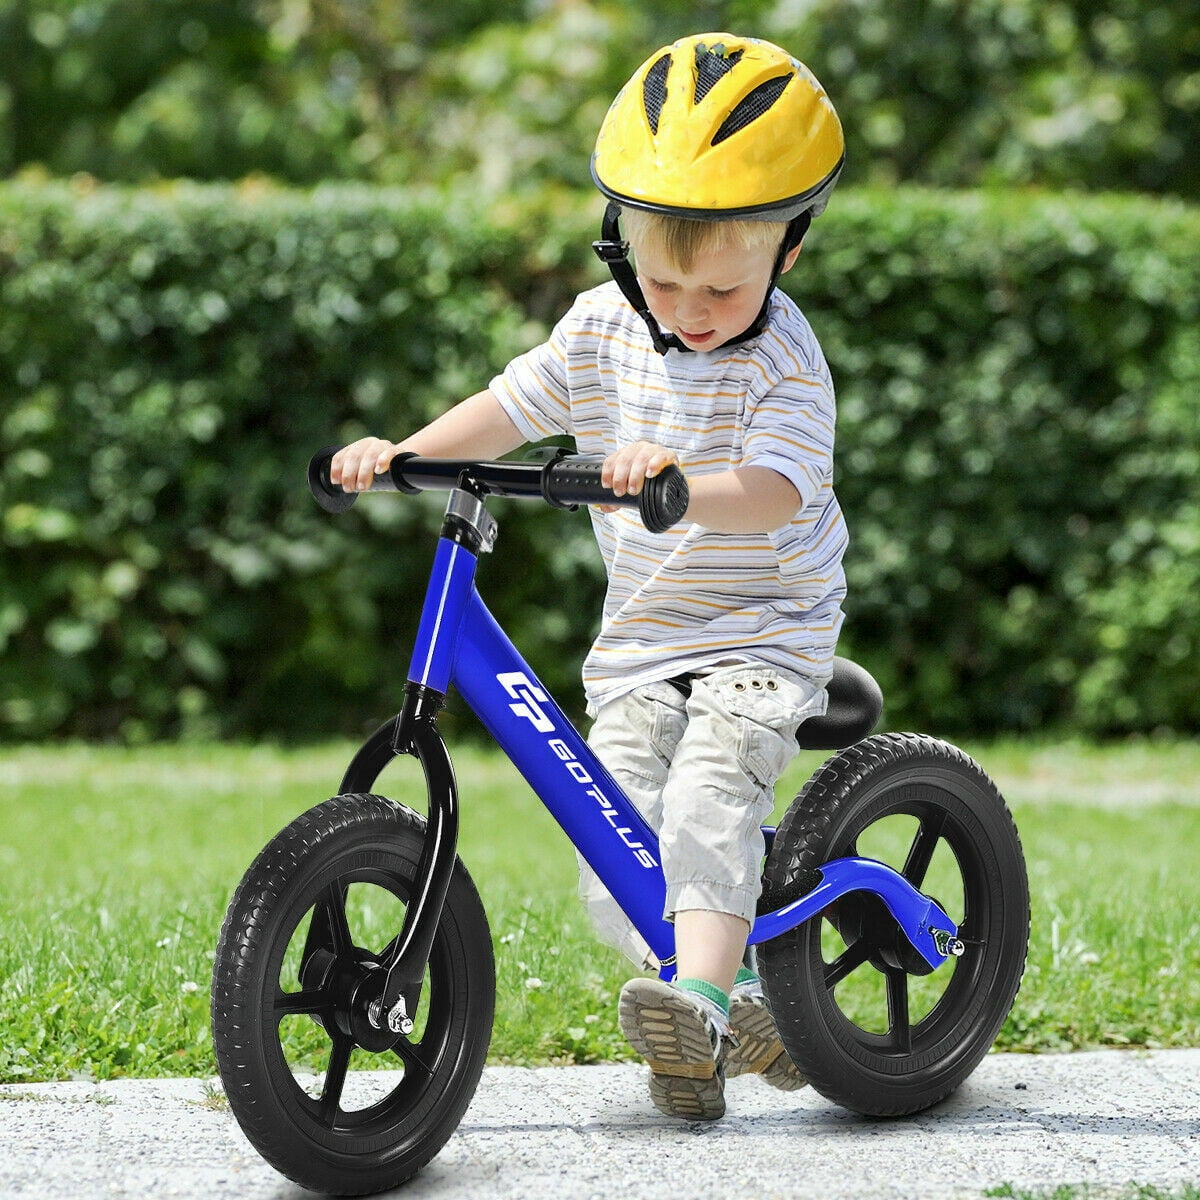 US No Pedal Kid Toddler Balance Pre Bike Bicycle Tricycle Beginner Learn To Ride 